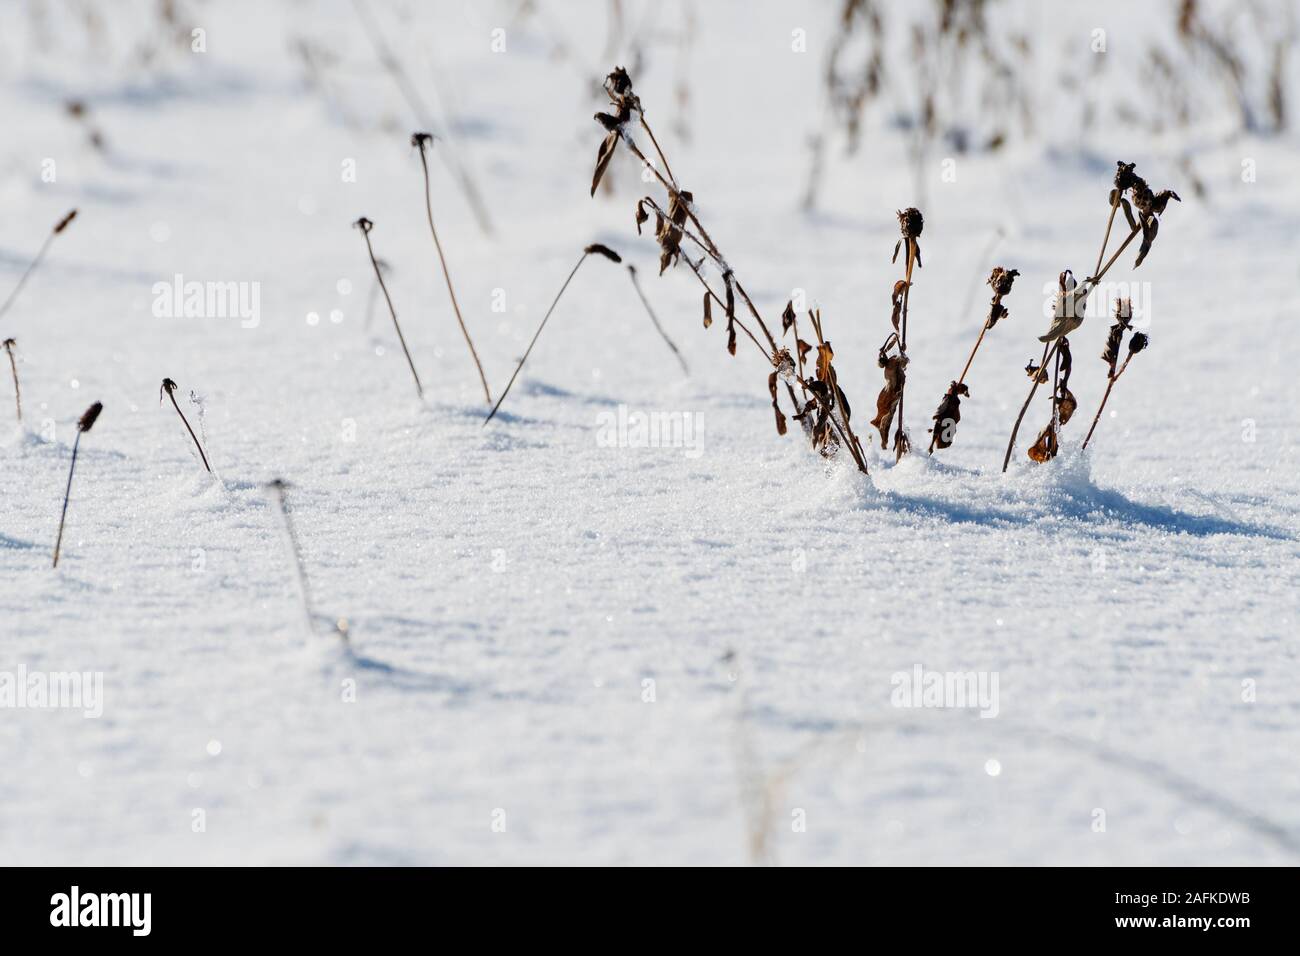 Closeup of dry grass sticking out of snow. Botany, seasons and weather concepts Stock Photo